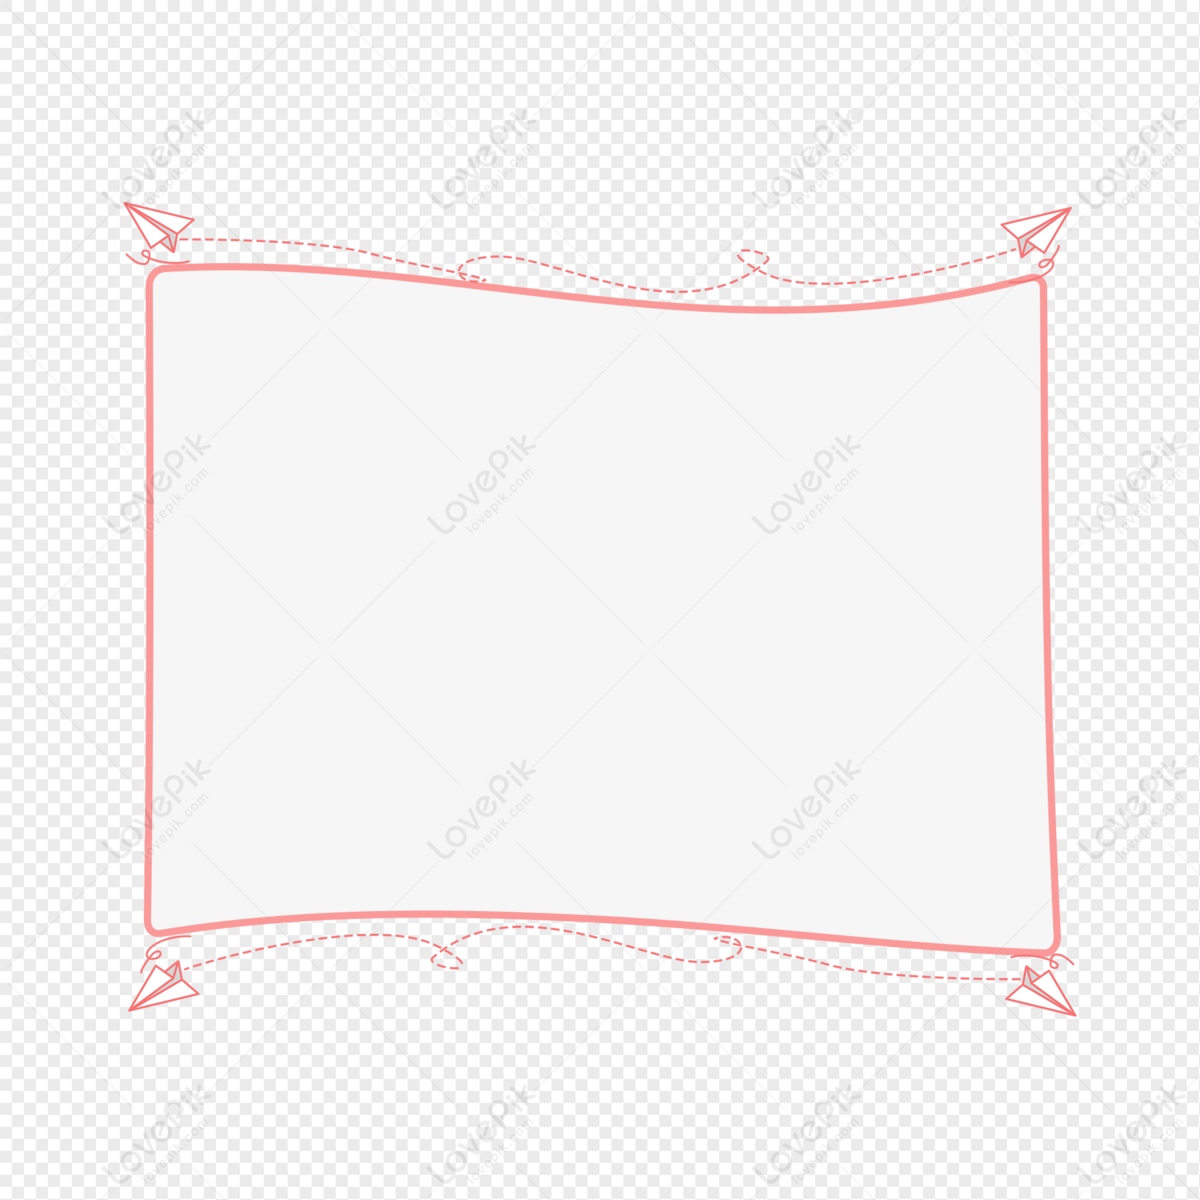 Small Fresh Border Free PNG And Clipart Image For Free Download ...